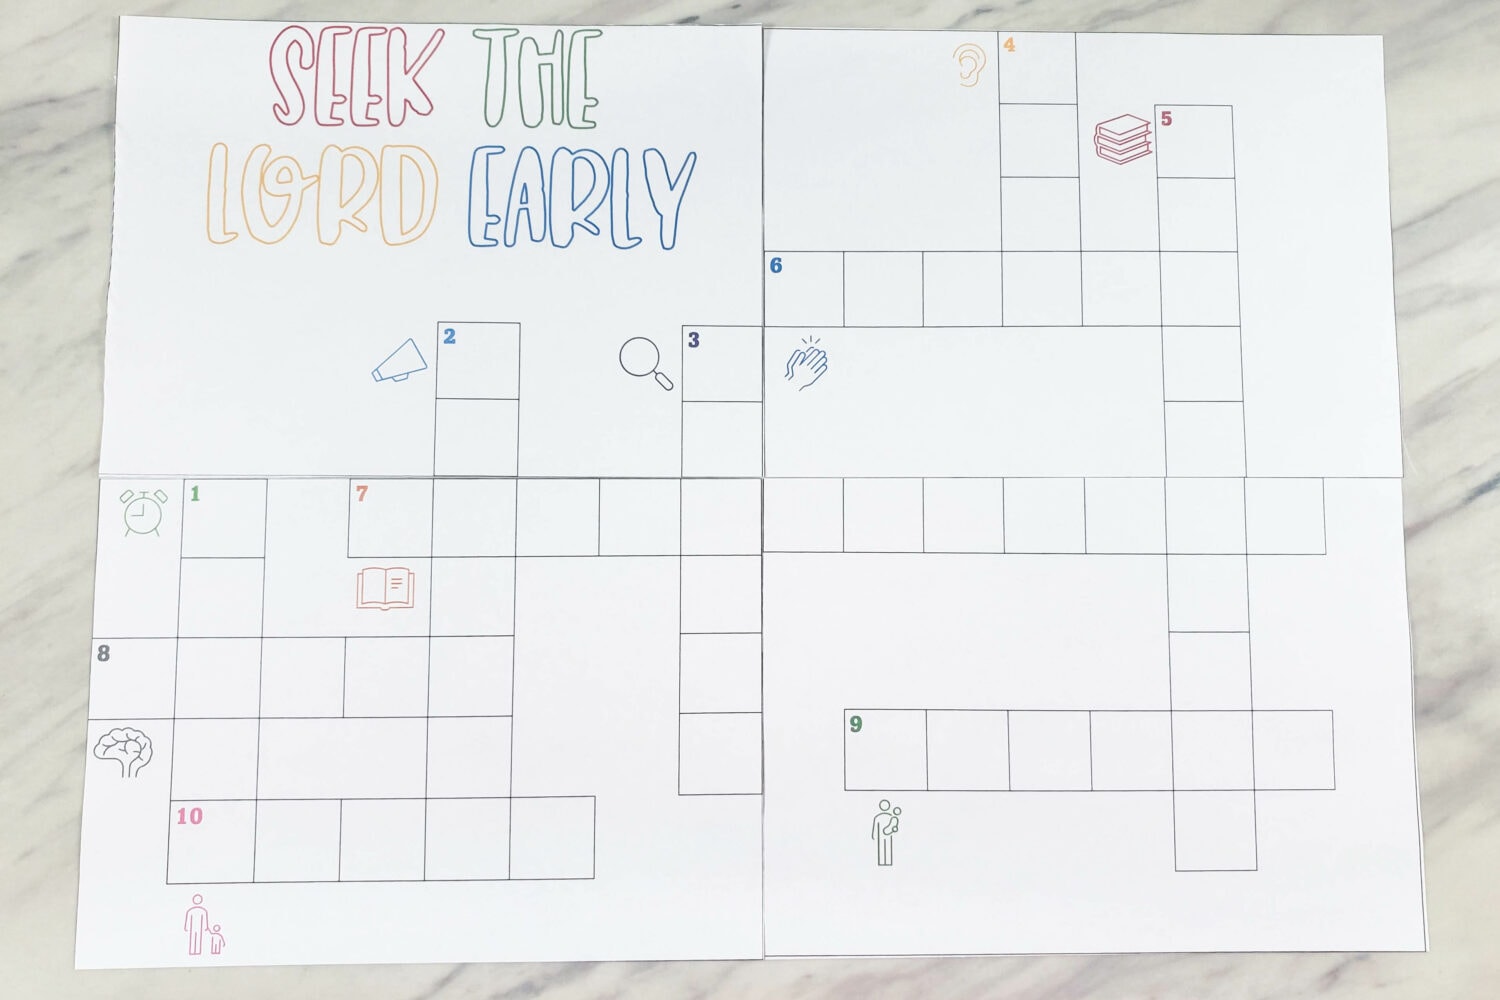 Seek the Lord Early Crossword Puzzles singing time ideas to fill in keywords with simple clues and printable song helps for LDS Primary Music Leaders